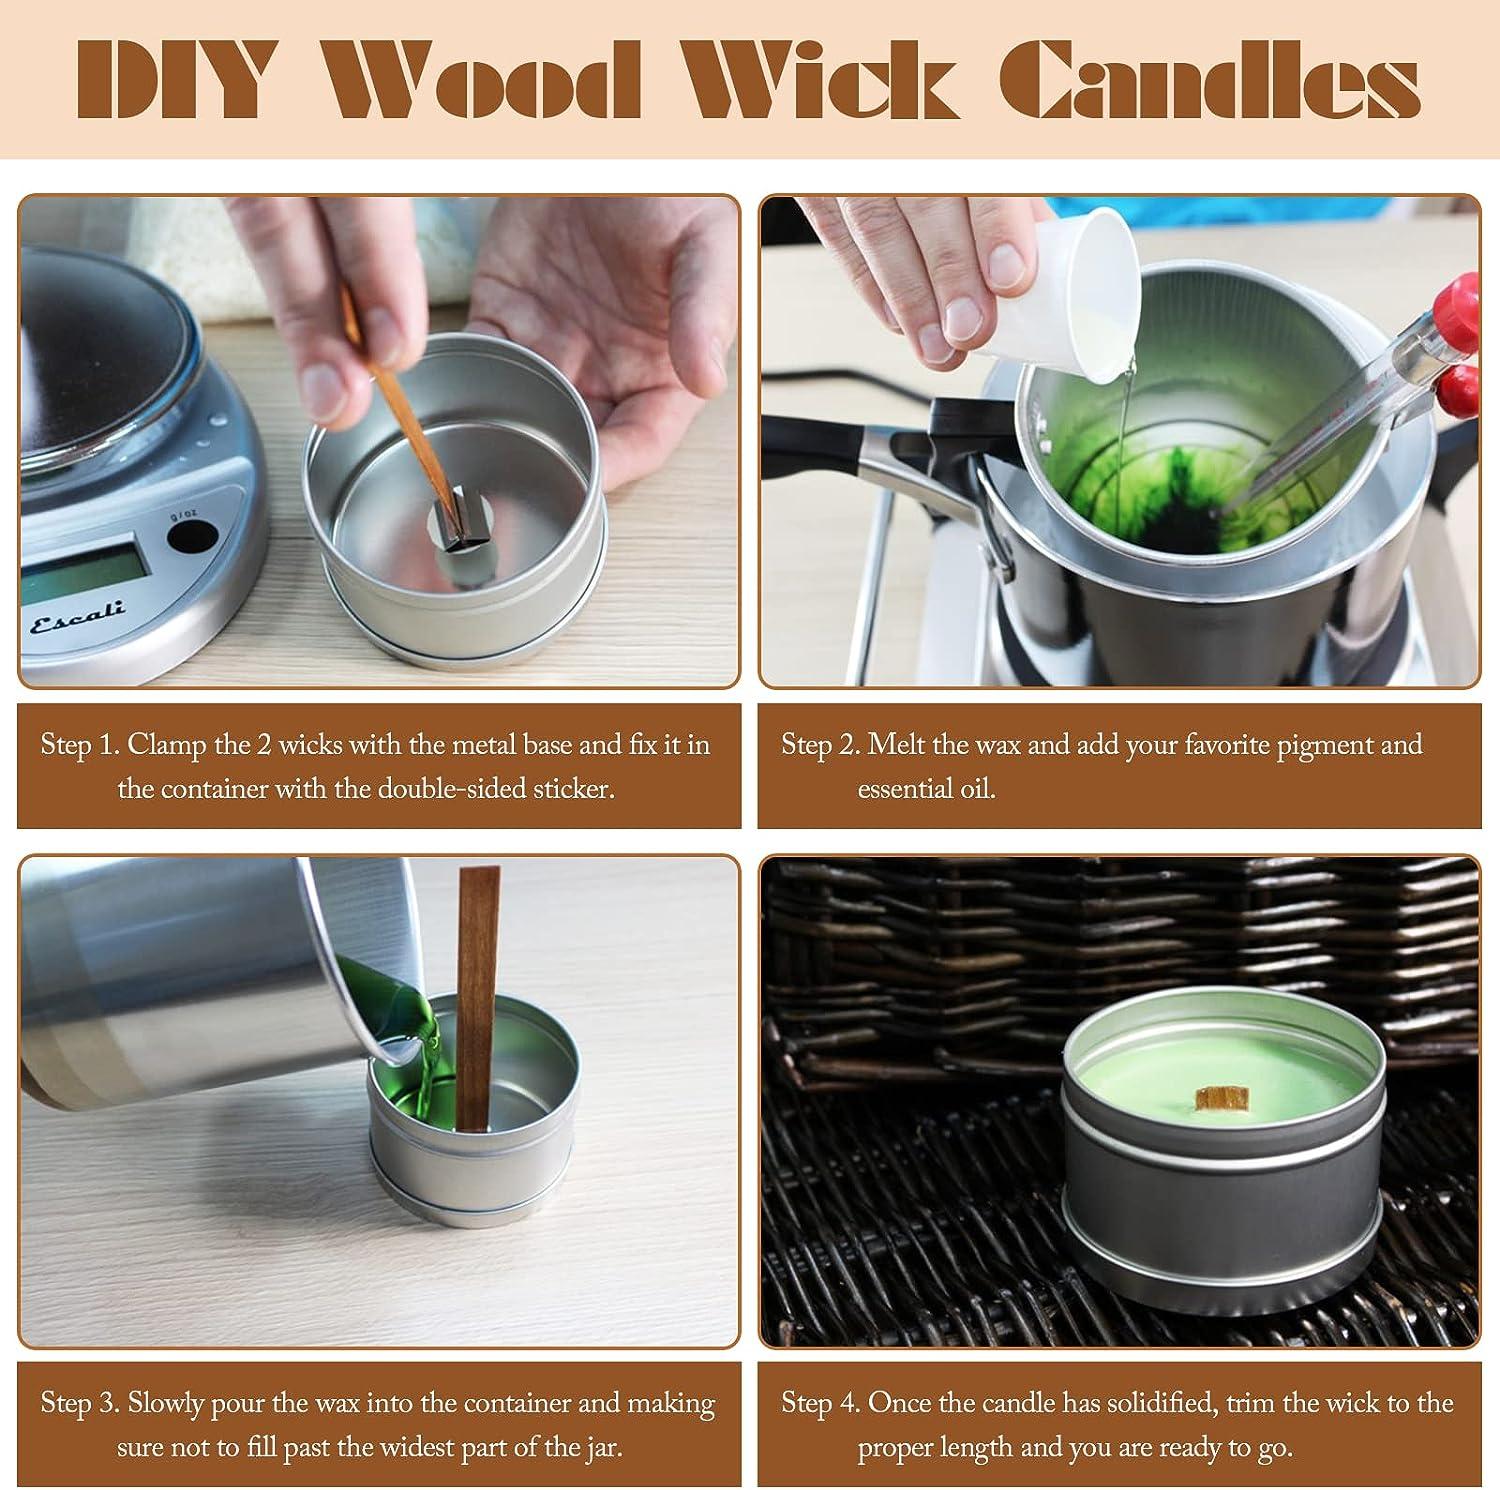 How to Make Wood Wicks for Candles, ehow.com